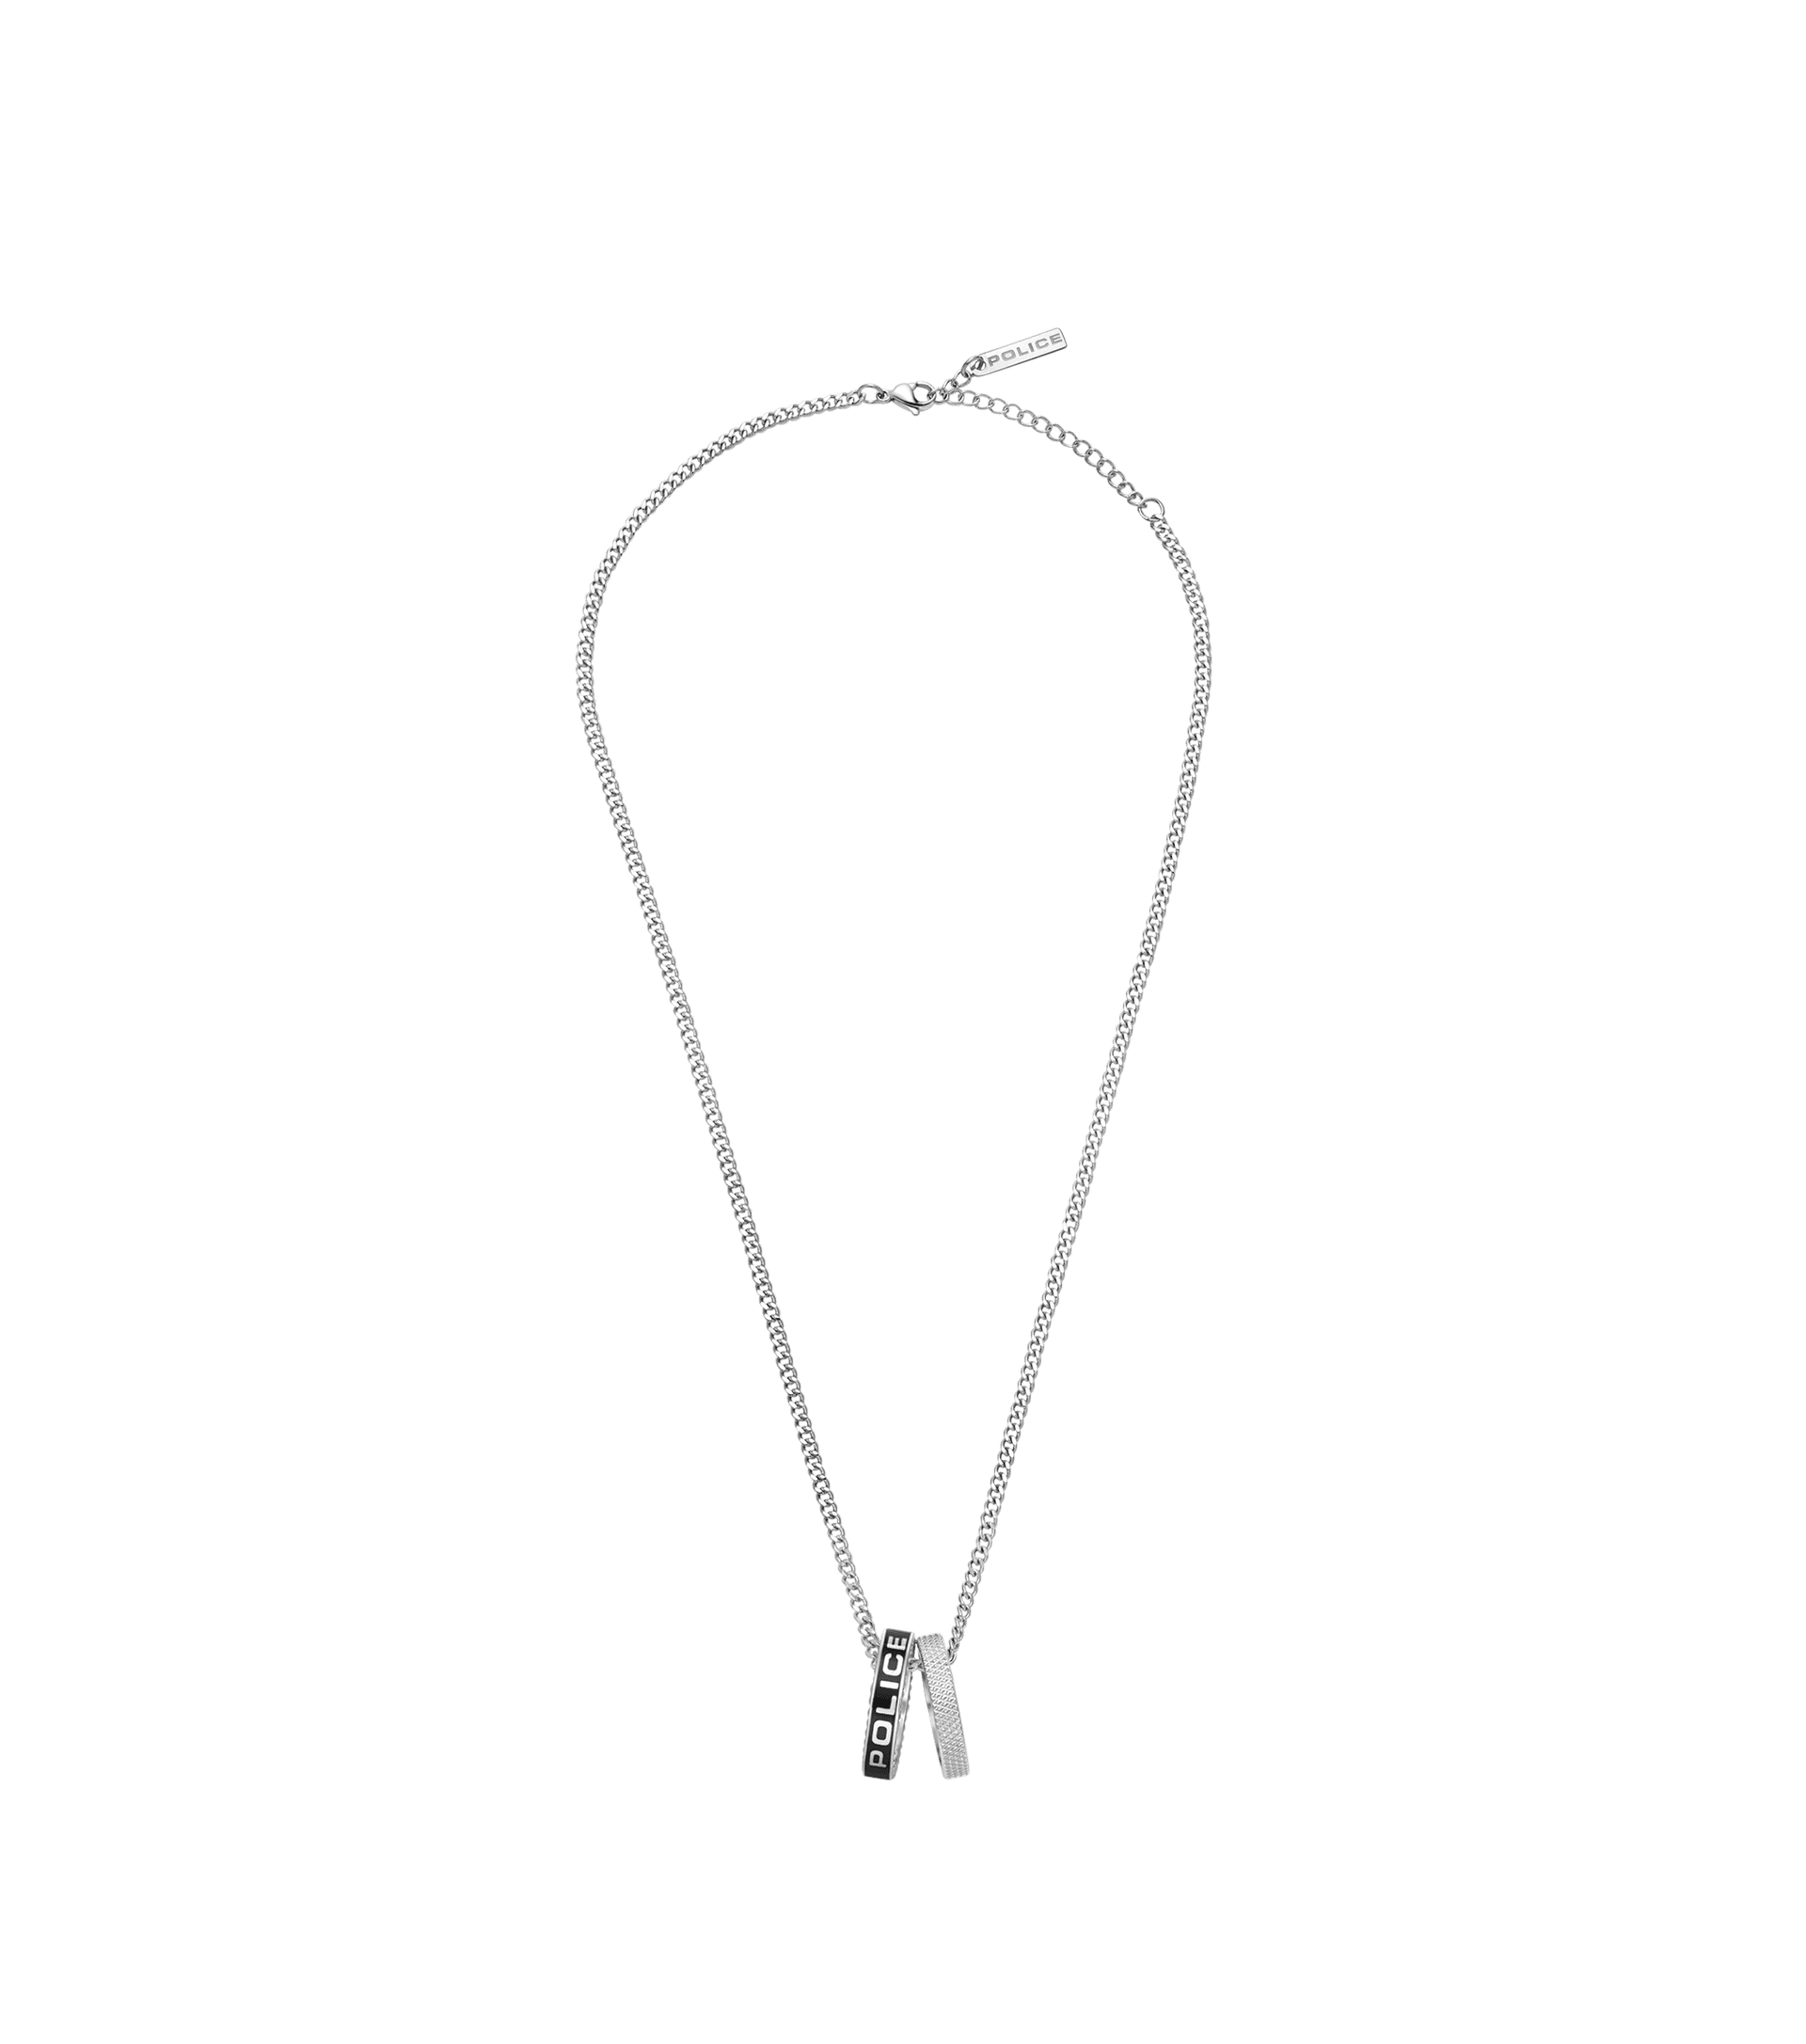 Police jewels - Duo Necklace Police For Men PEAGN0032701